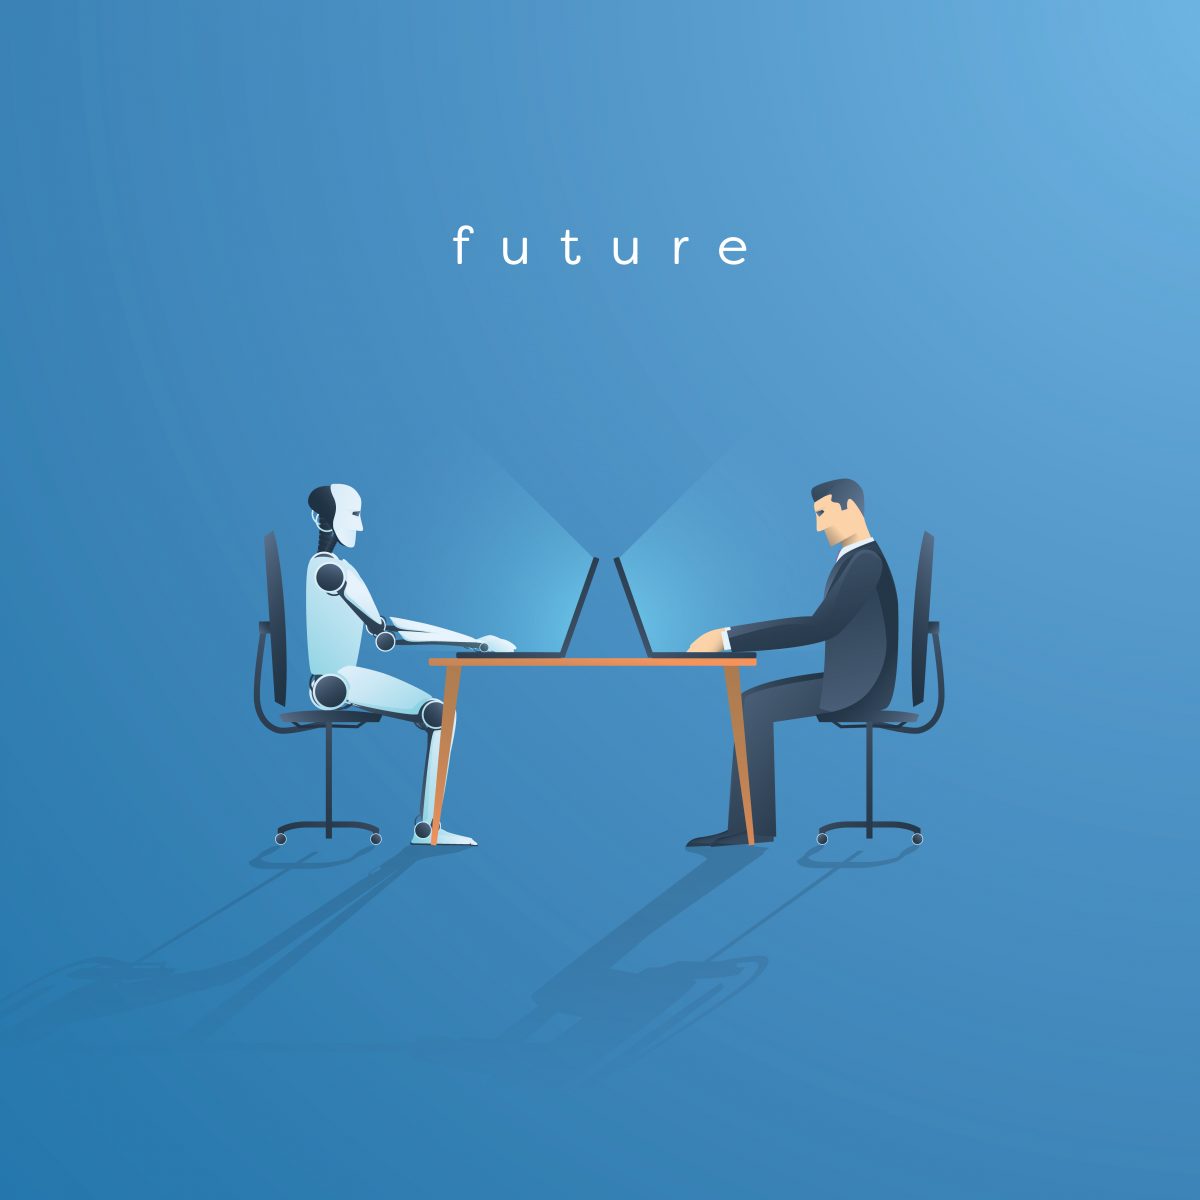 How Will We Truly See the Impact of AI & Robotics in HR? - HRO Today